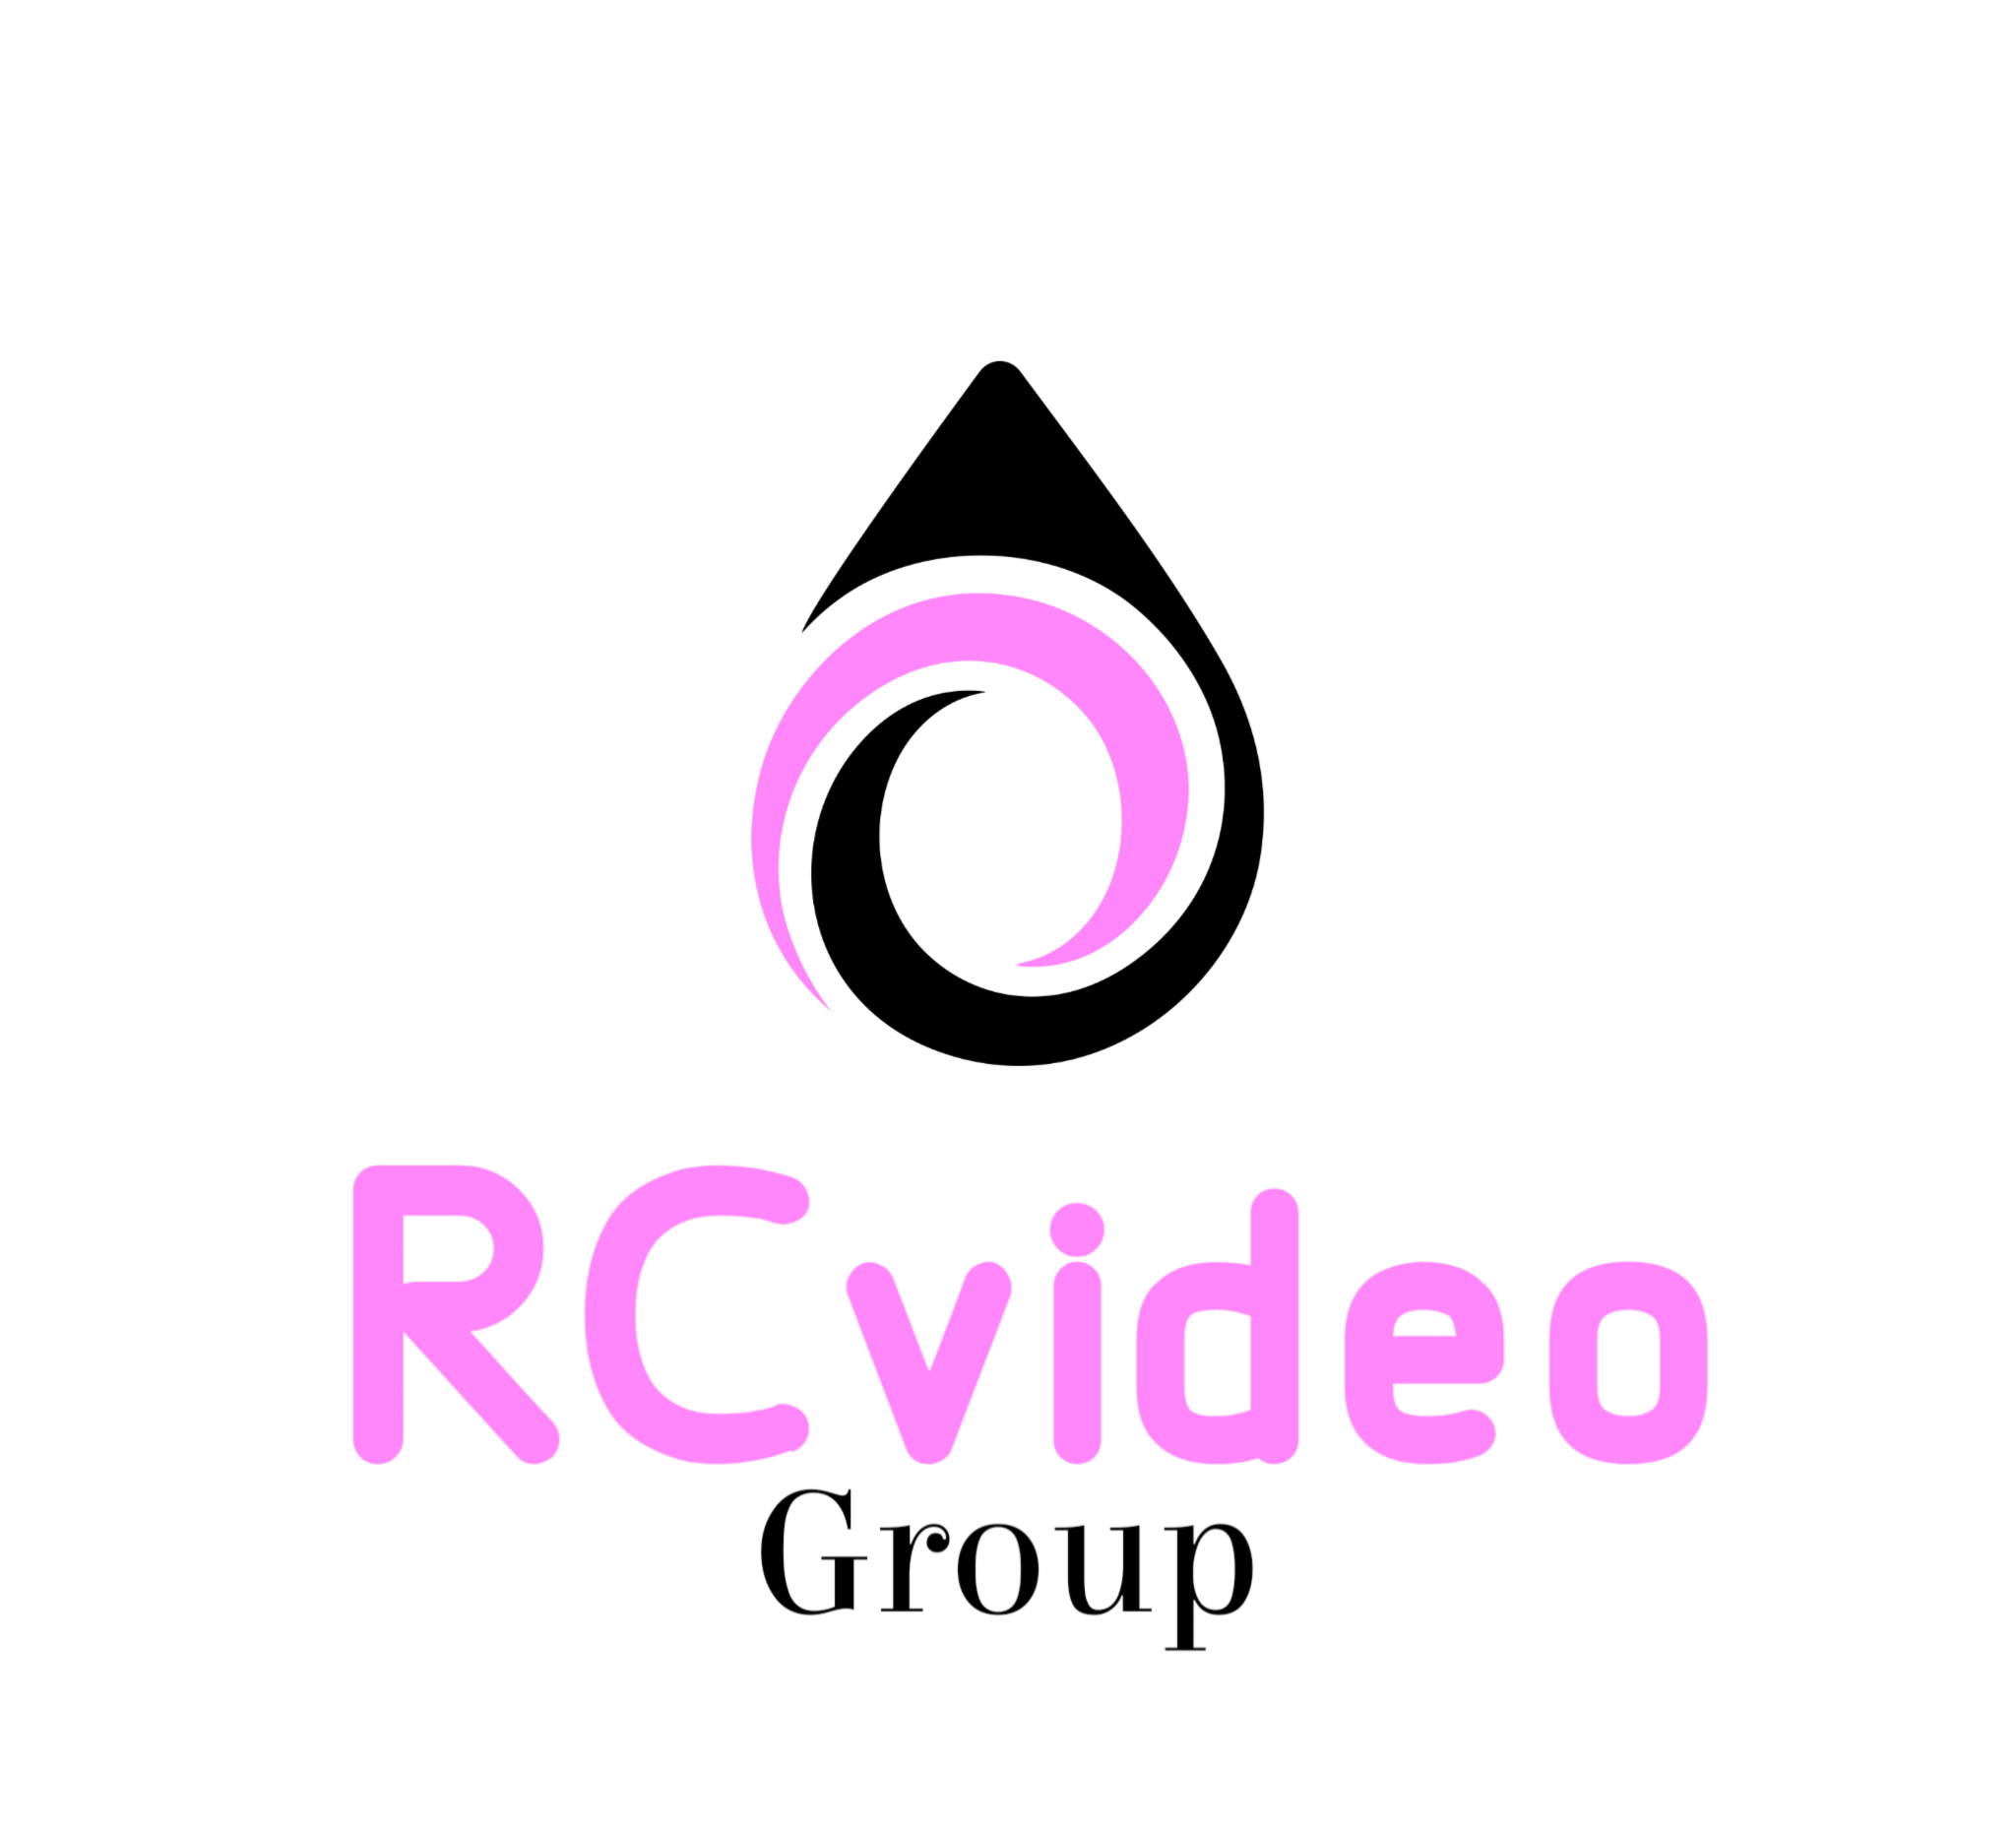 RCvideo Group